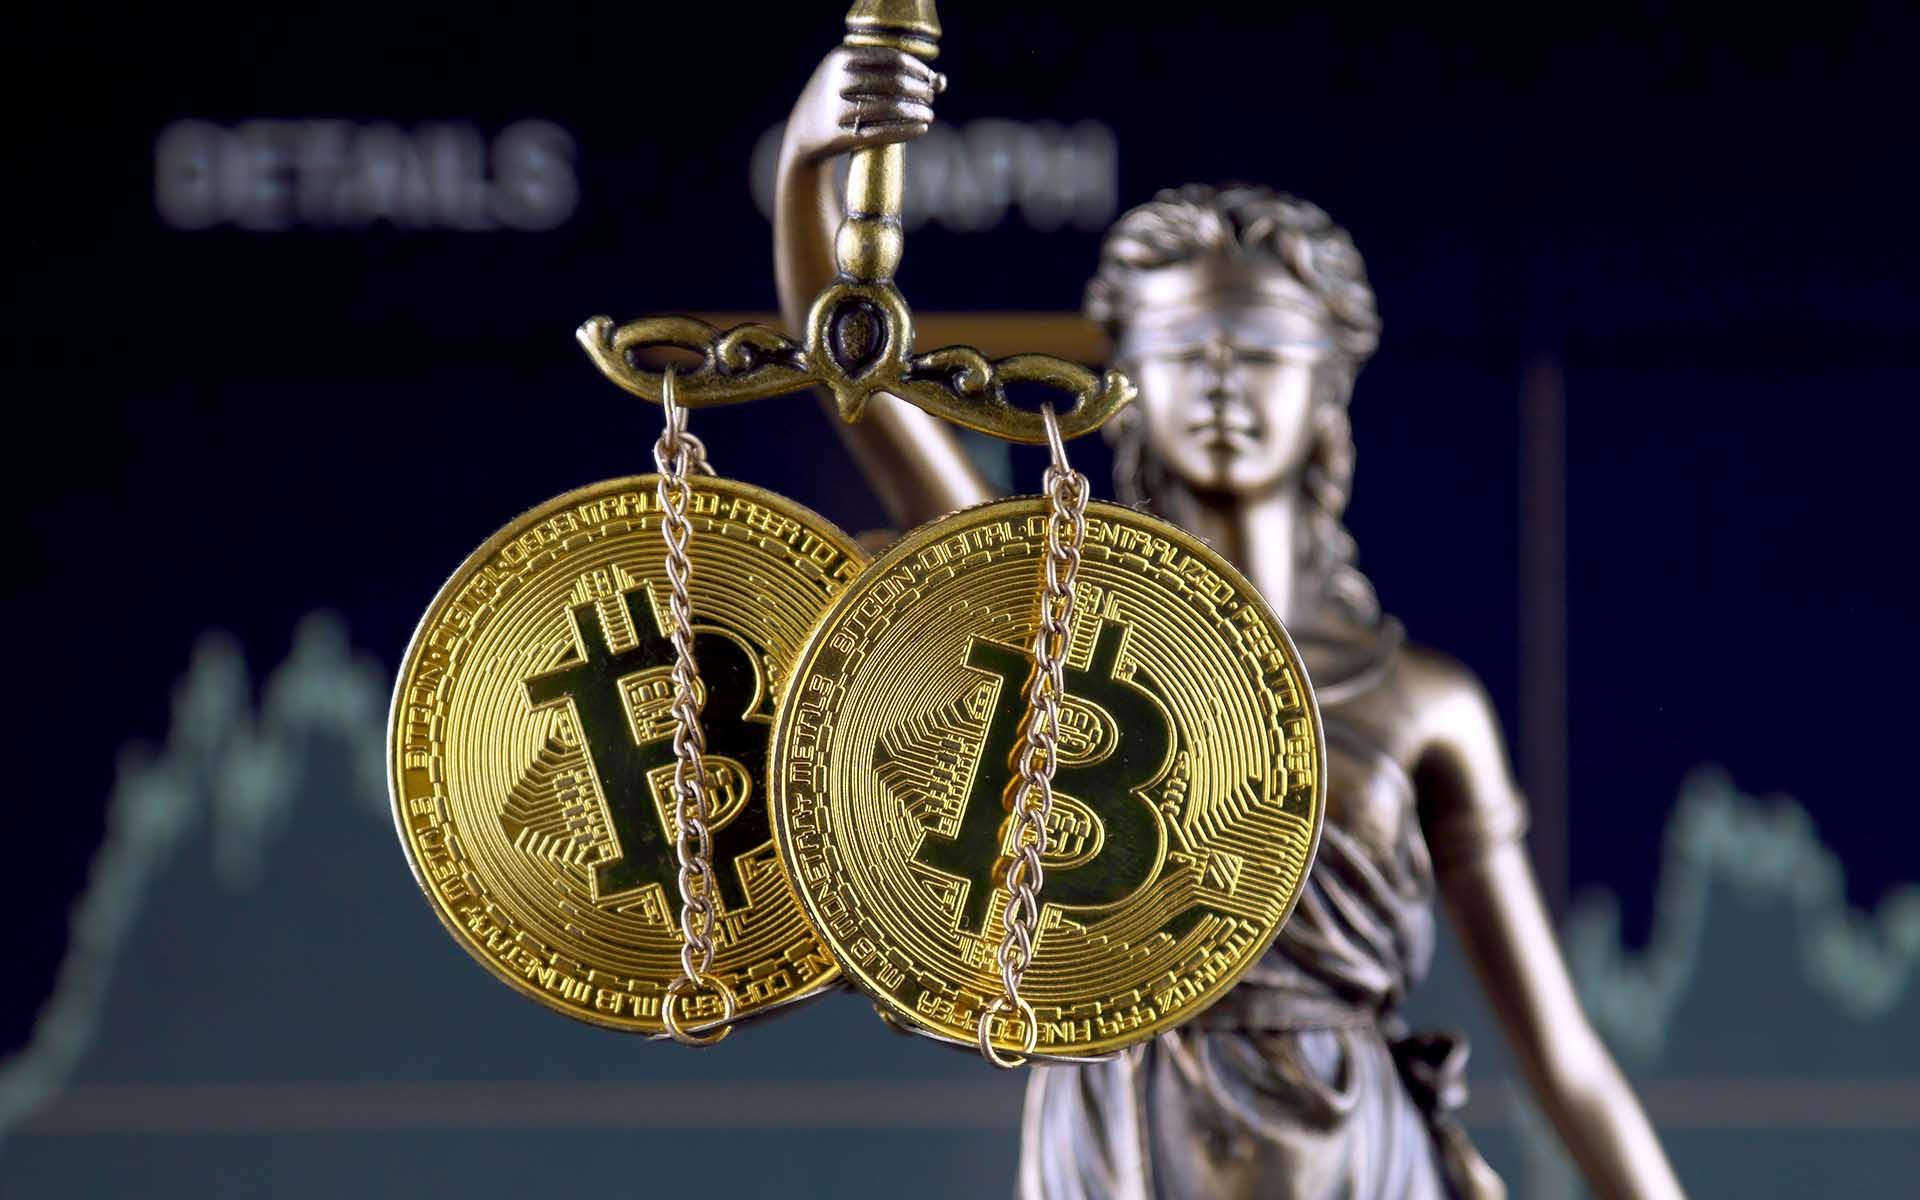 2nd largest Italian Bank will pay $144M fine to Bitcoin mining firm 6